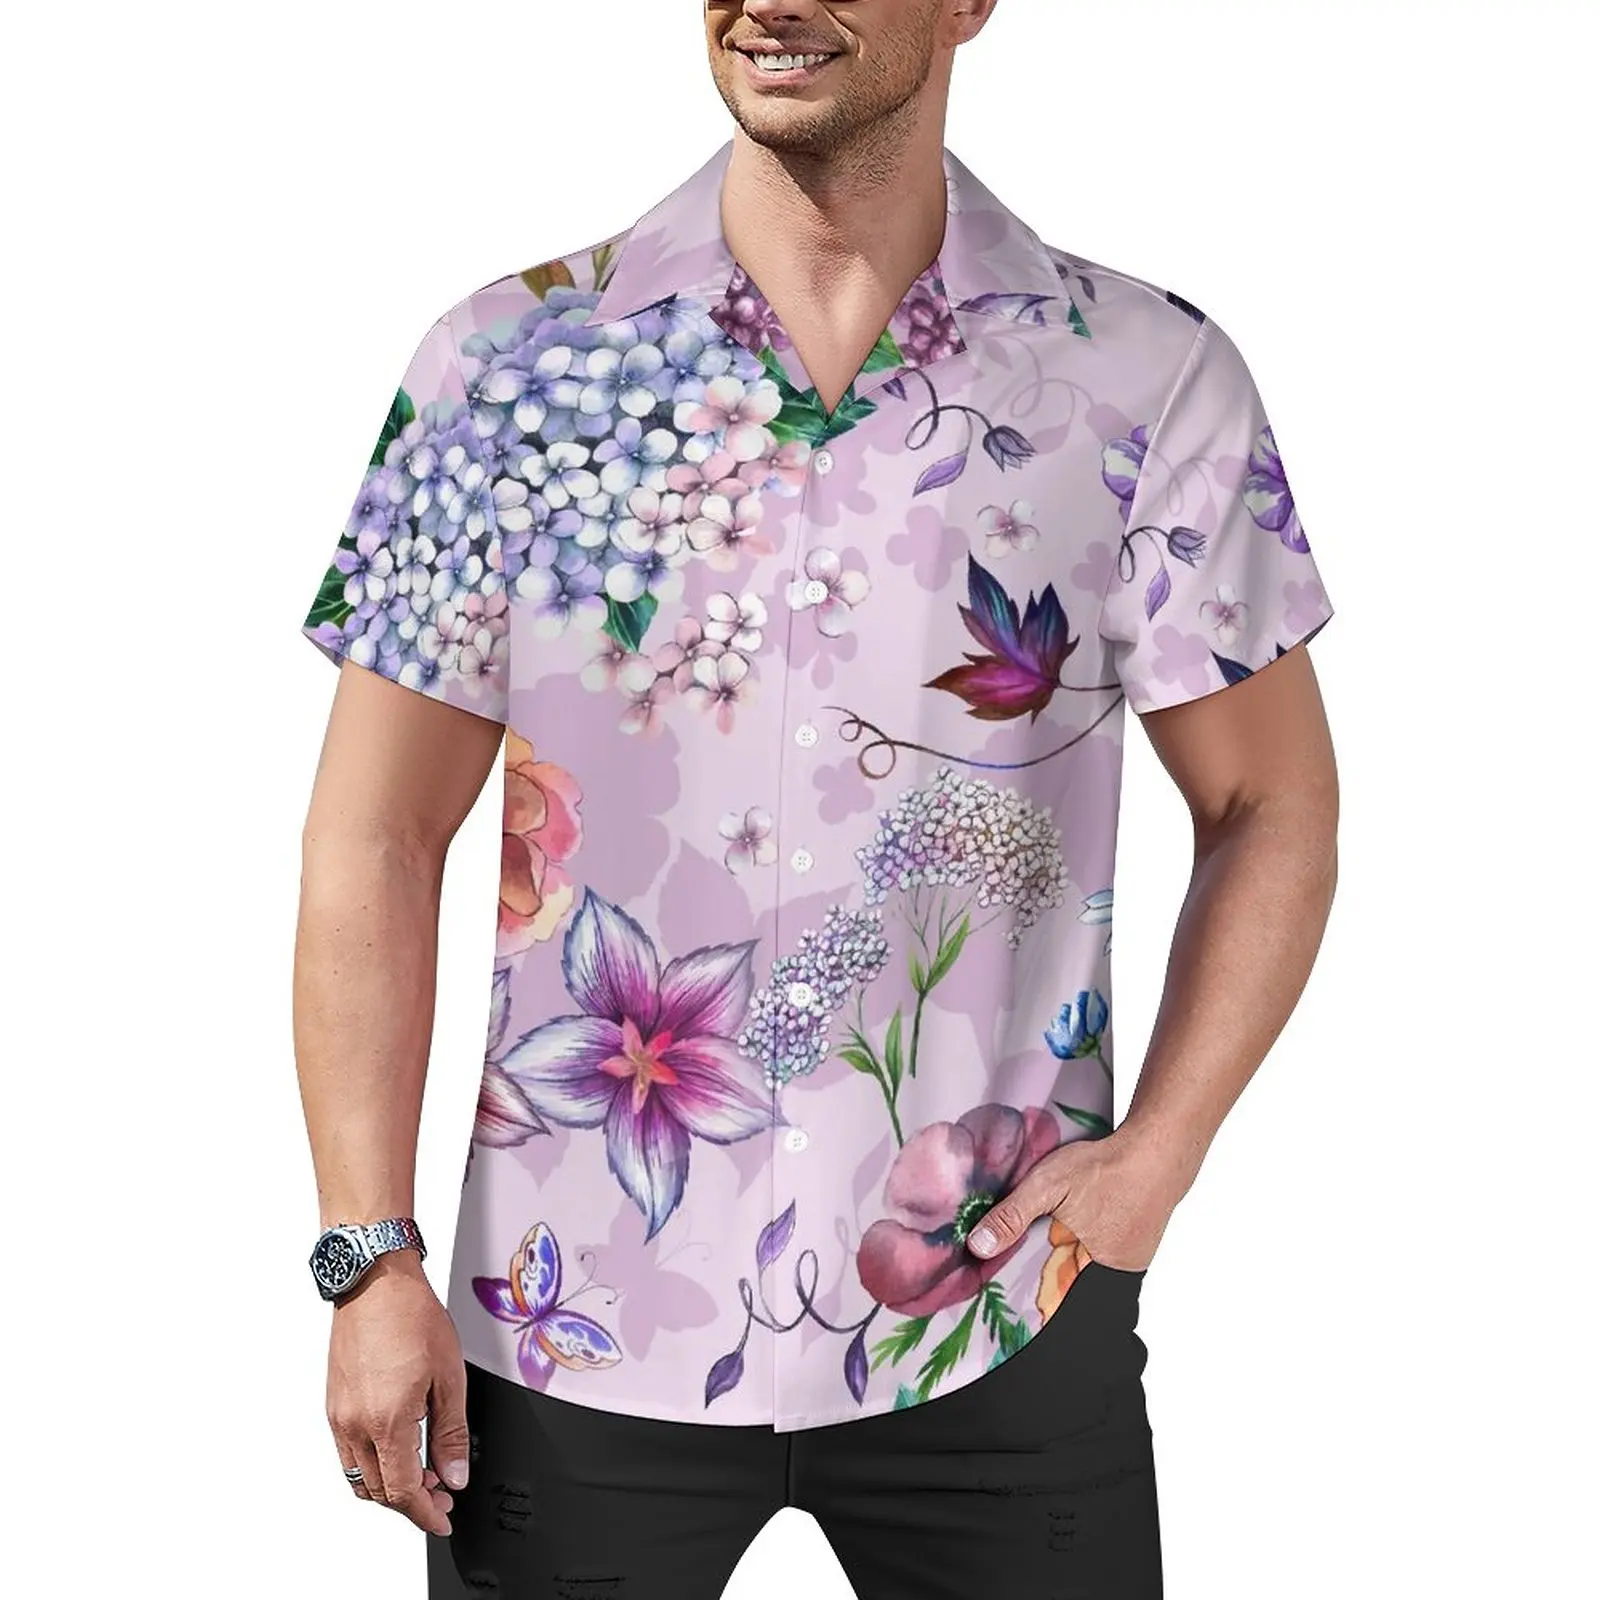 

Baroque Floral Print Vacation Shirt Flowers Hawaii Casual Shirts Man Aesthetic Blouses Short Sleeve Print Clothes Plus Size